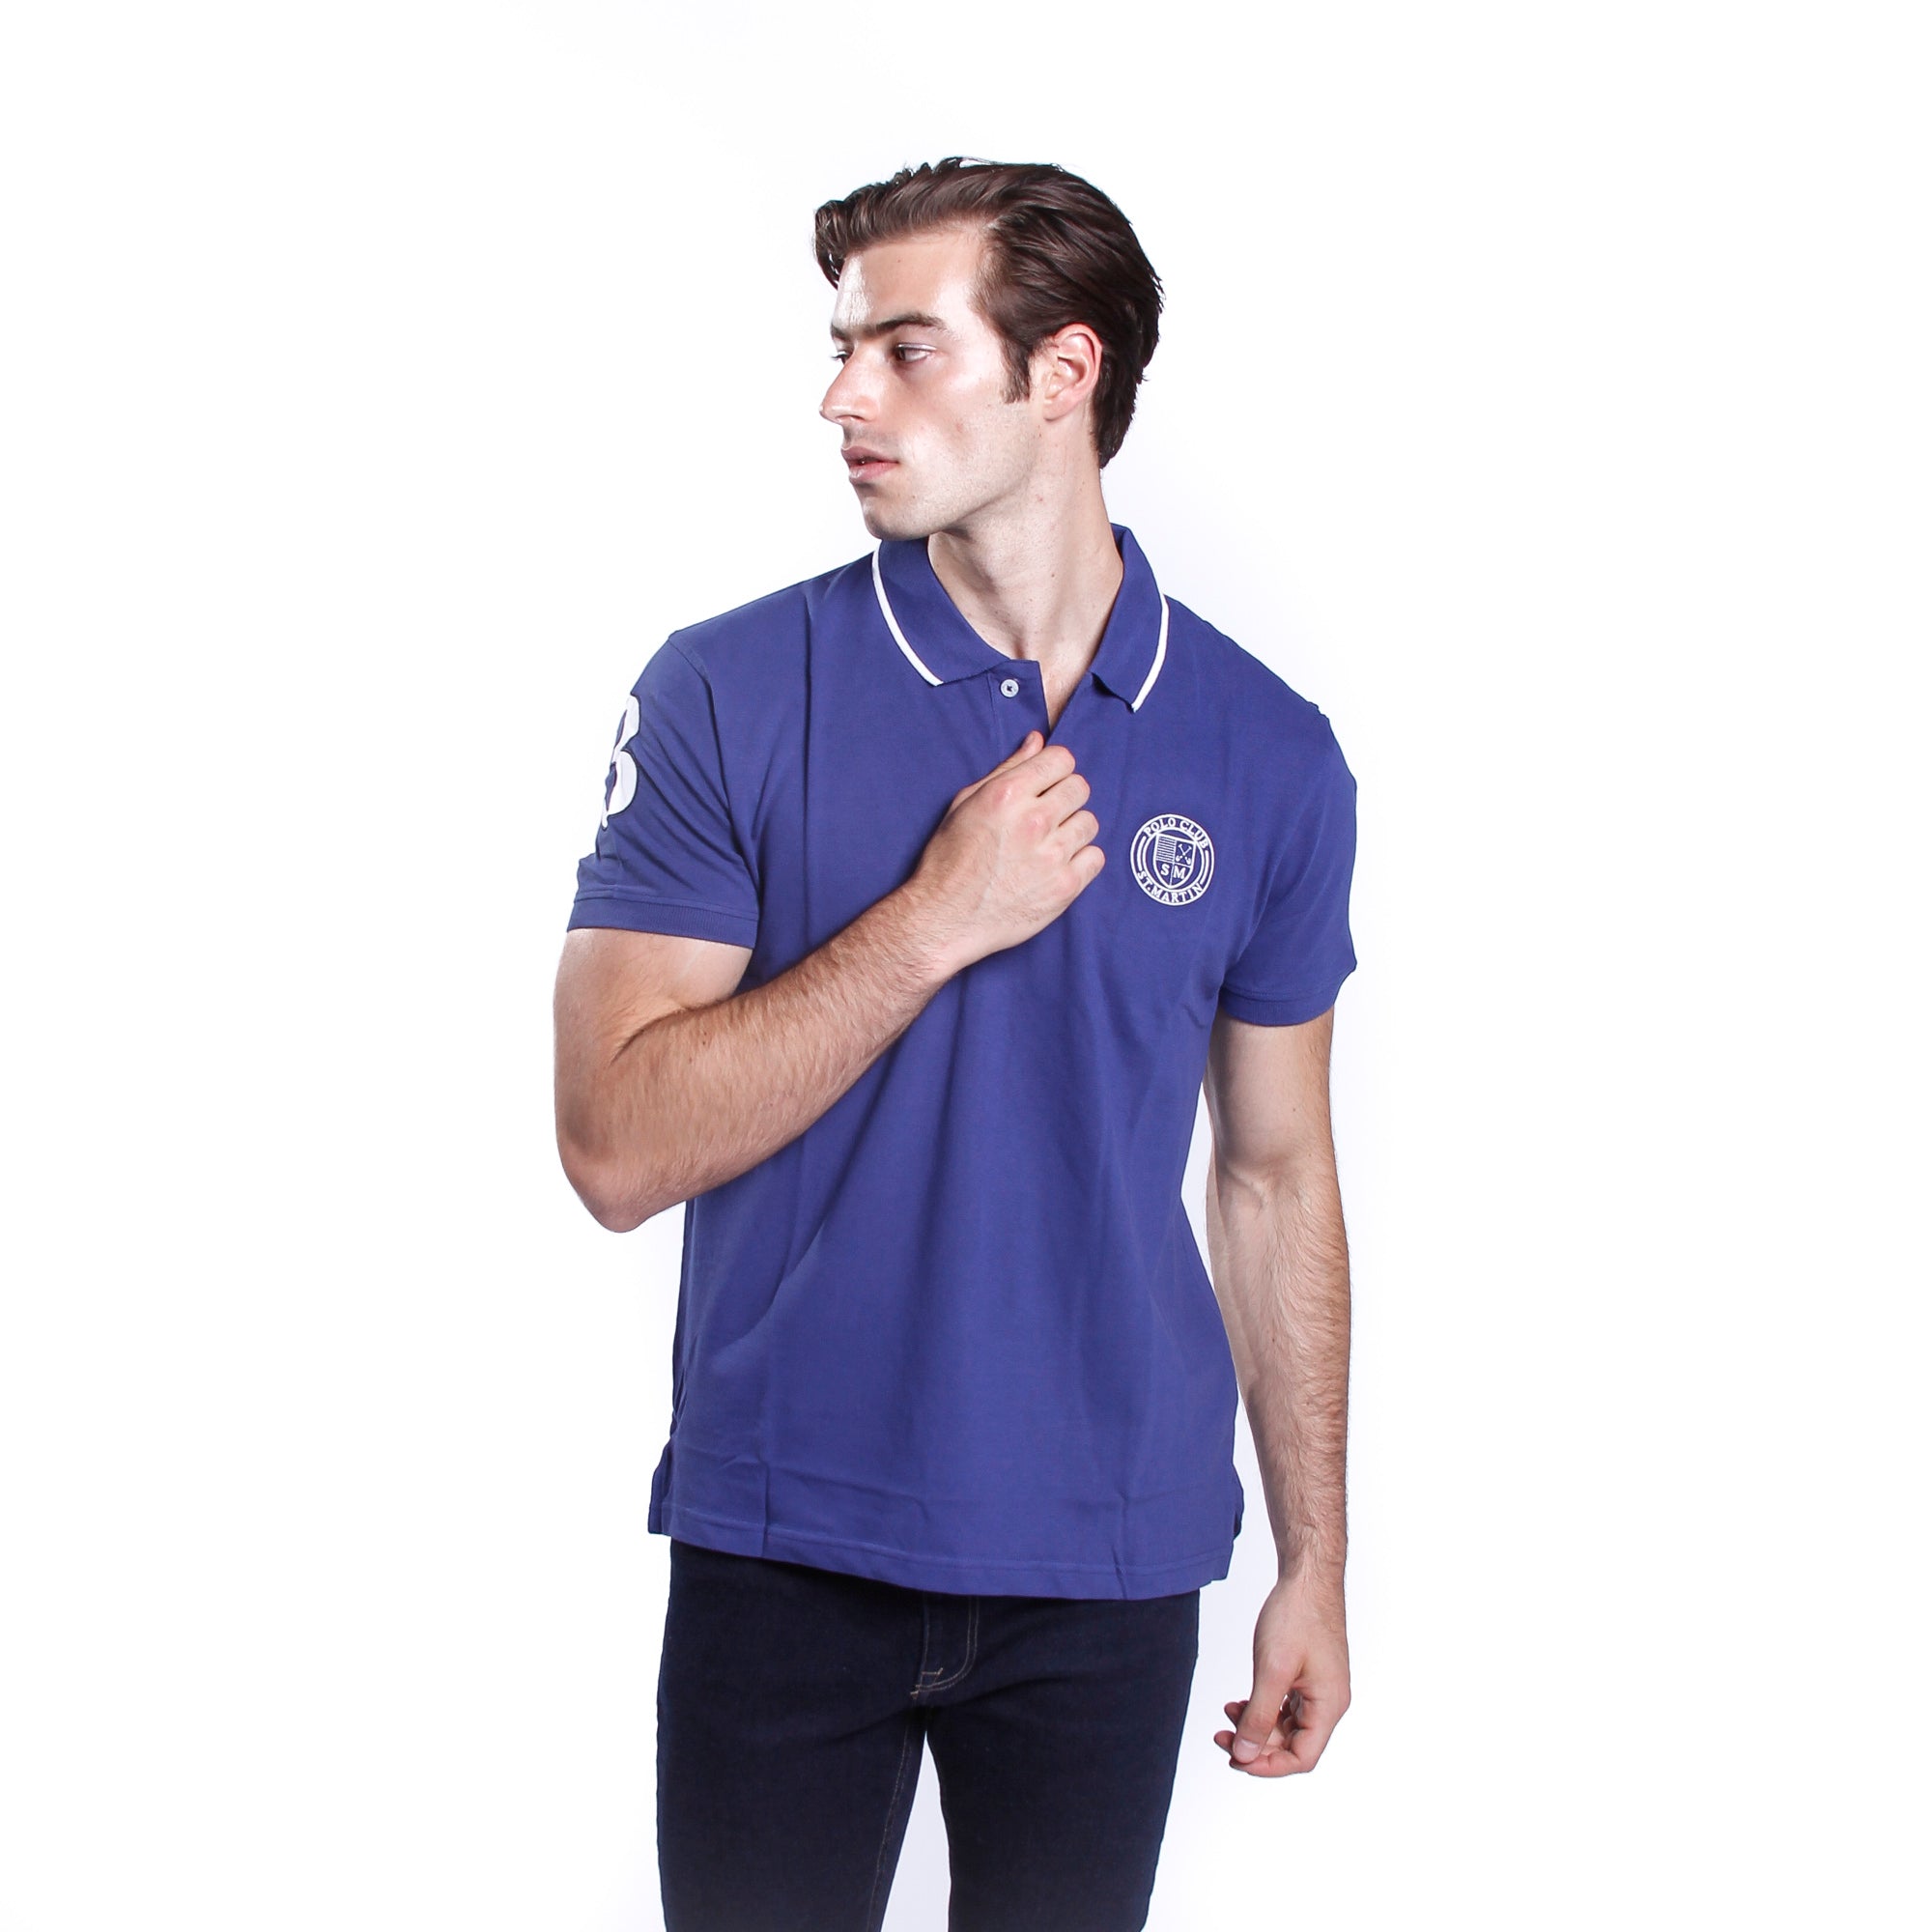 Solid color pique polo shirt with contrasting embroidery